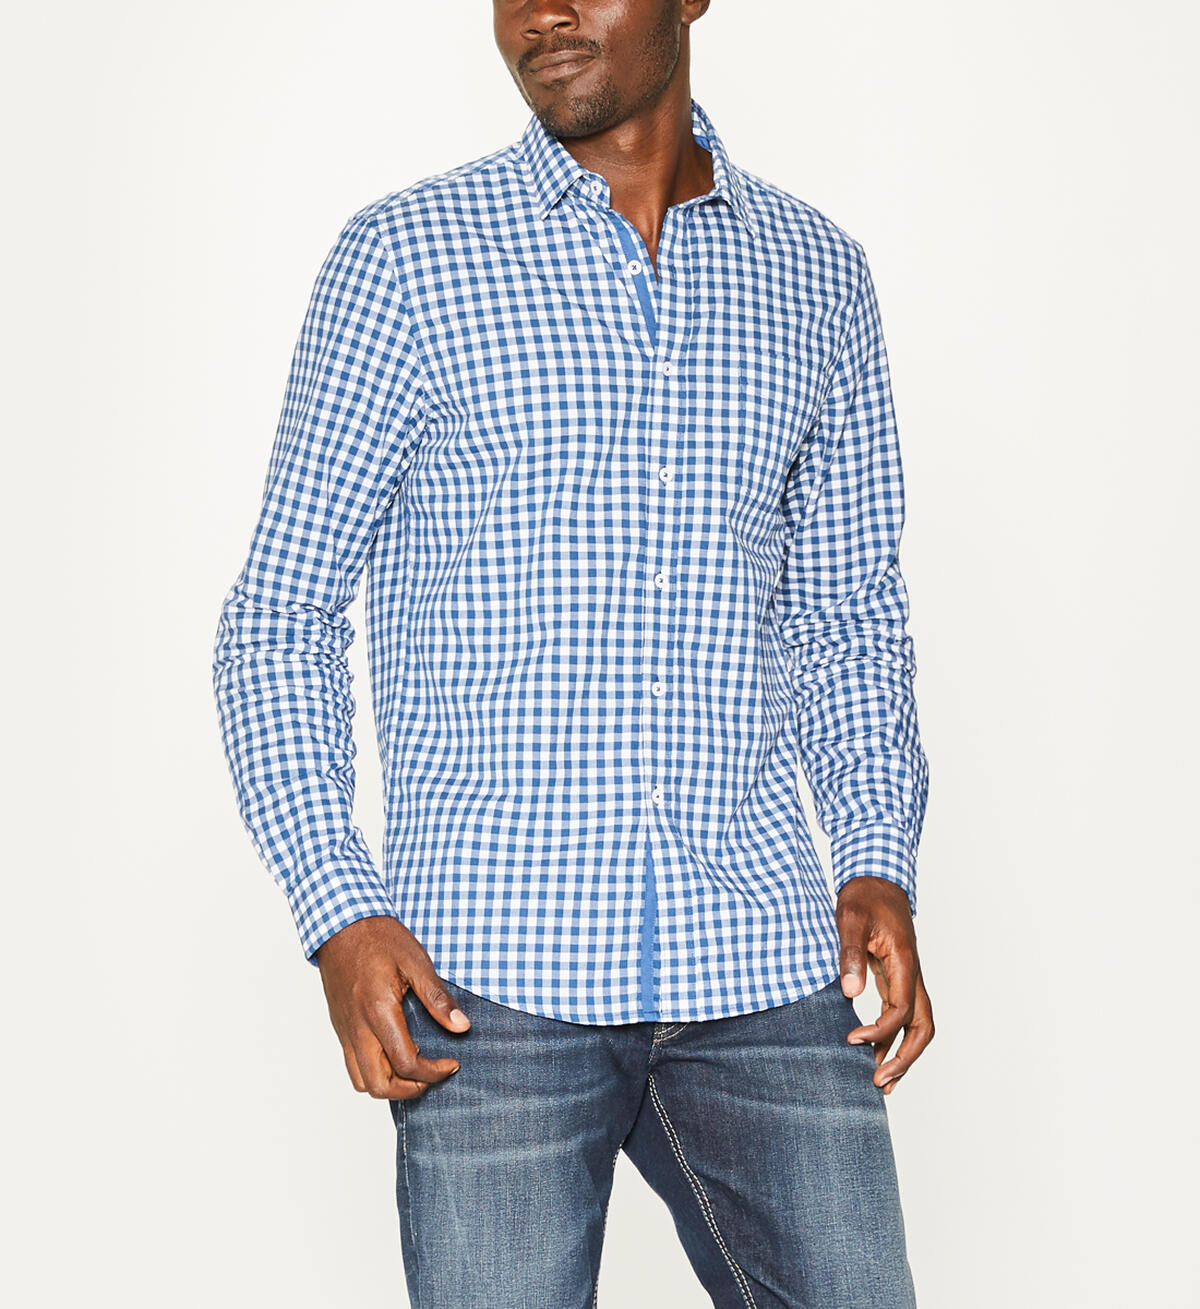 Maddox Long-Sleeve Button-Down Shirt Final Sale, , hi-res image number 0